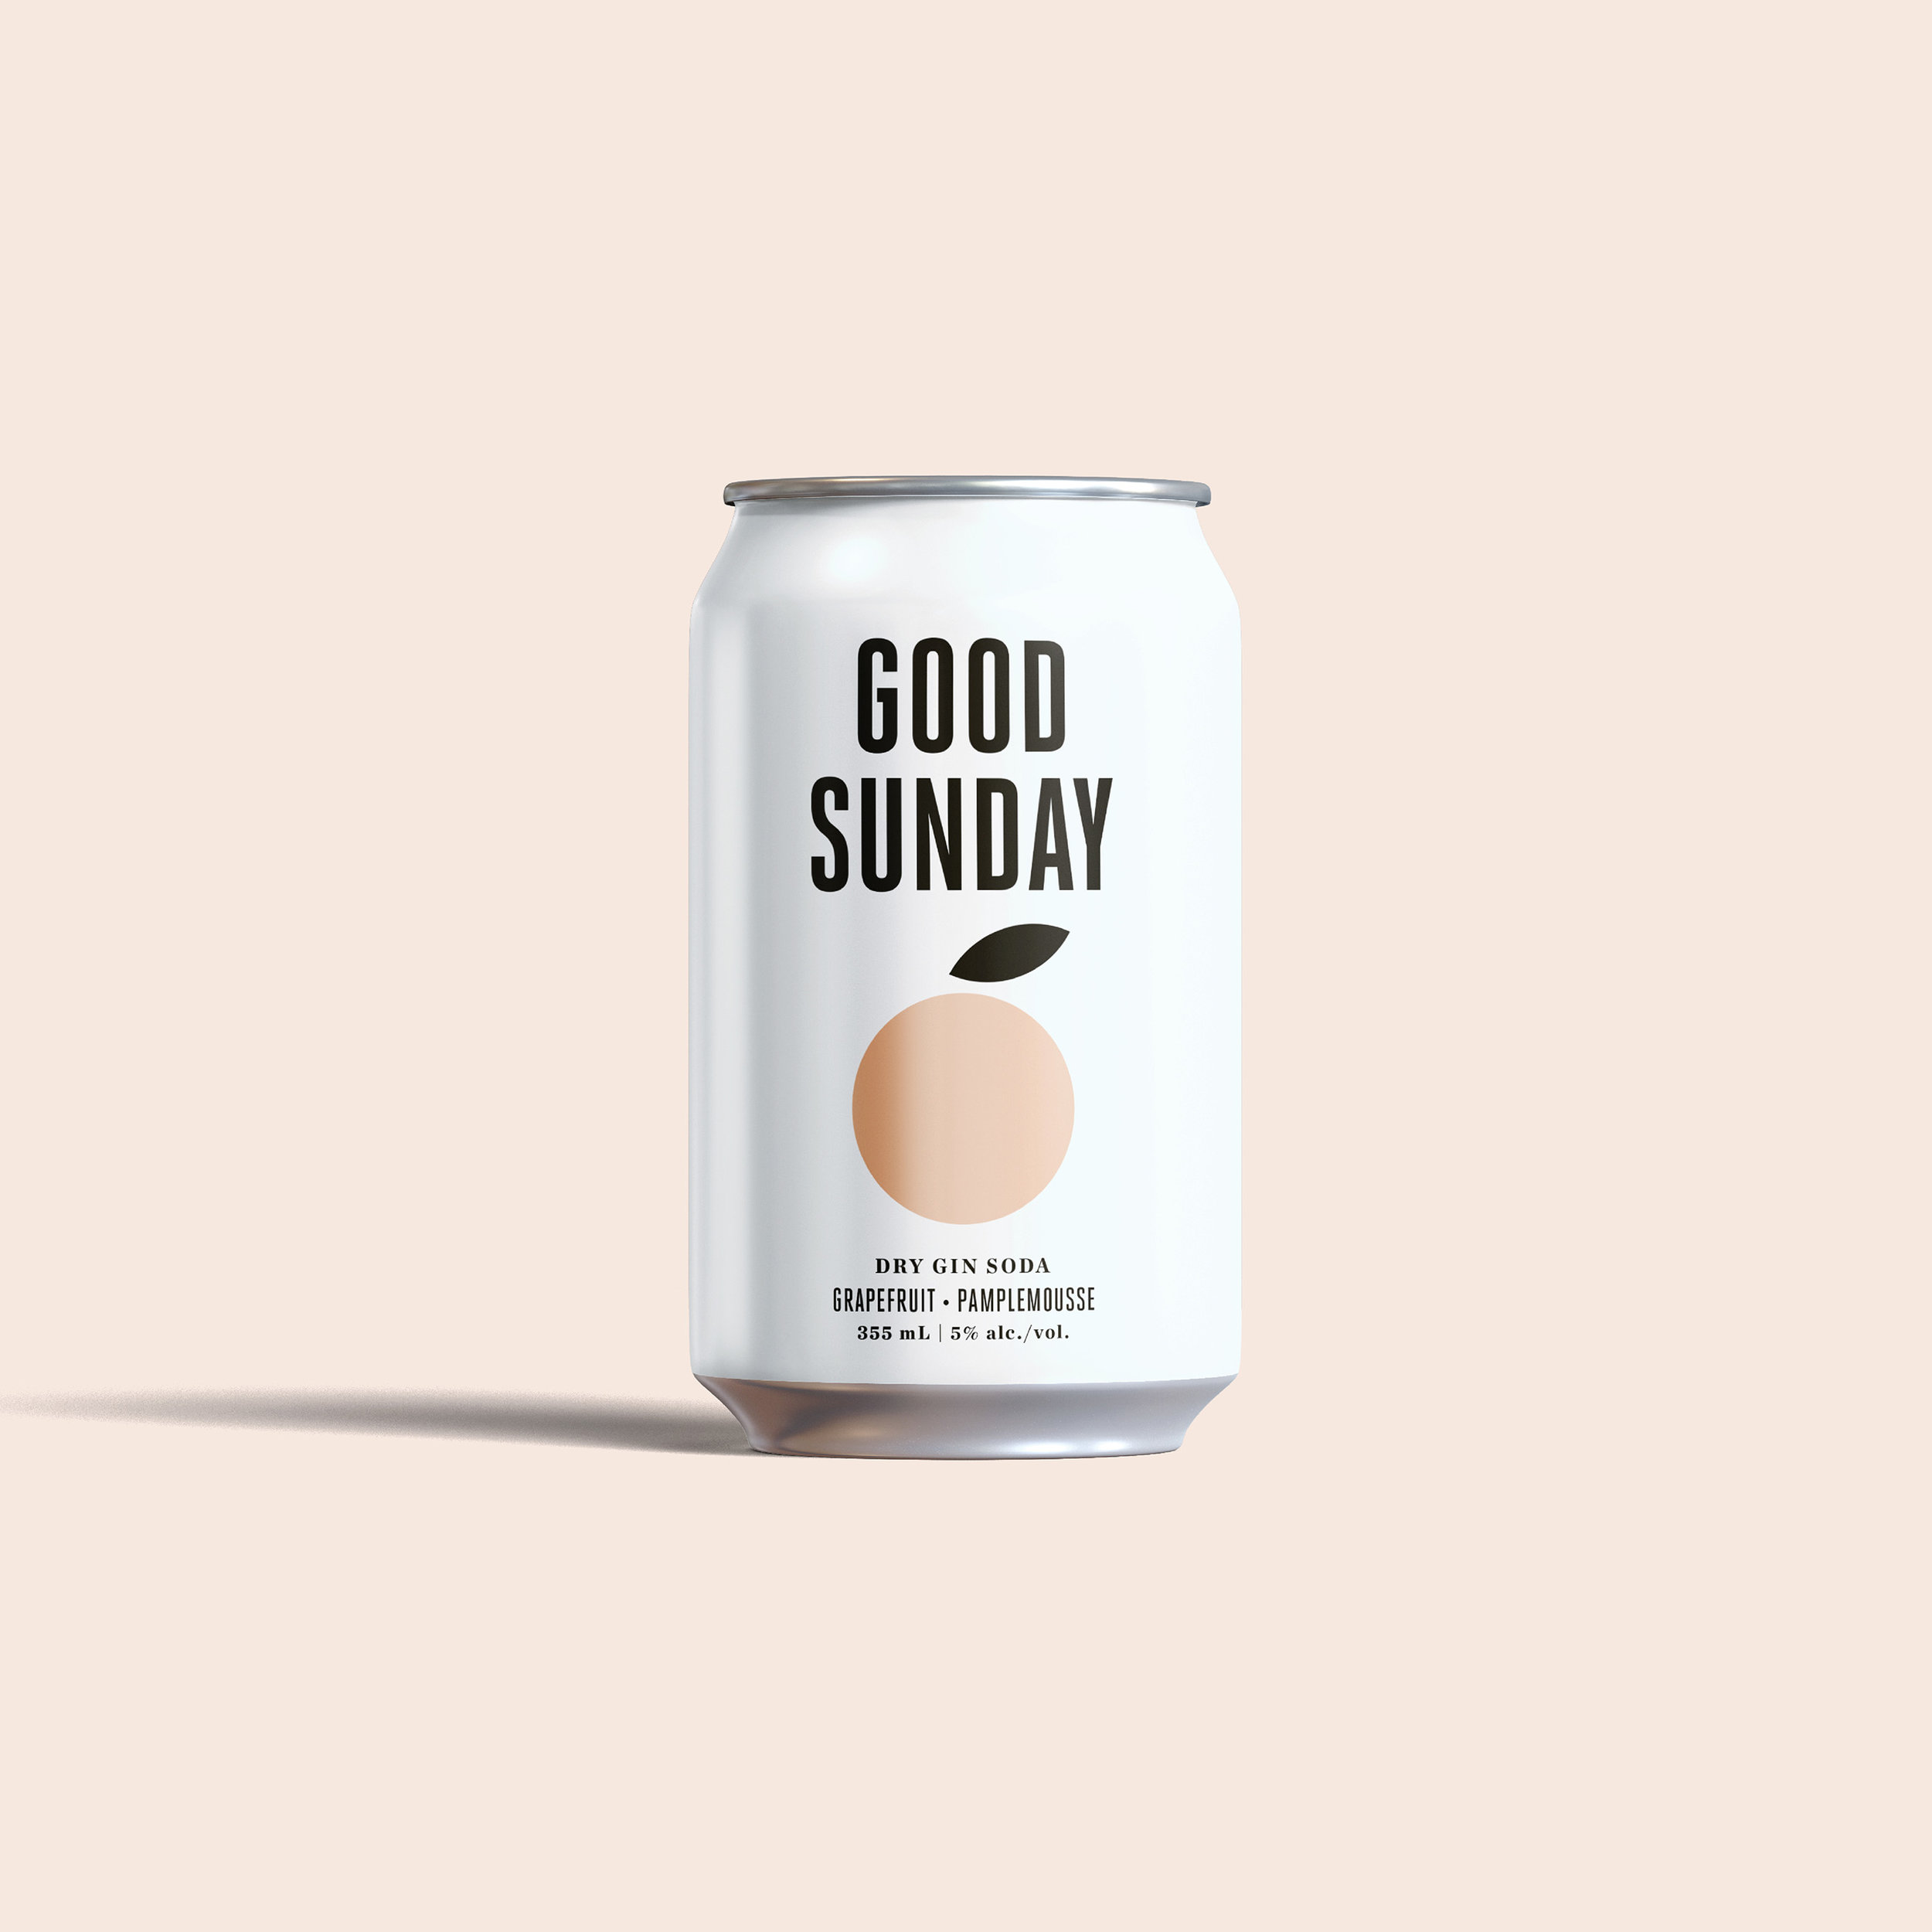 Good Sunday Packaging and Brand Identity